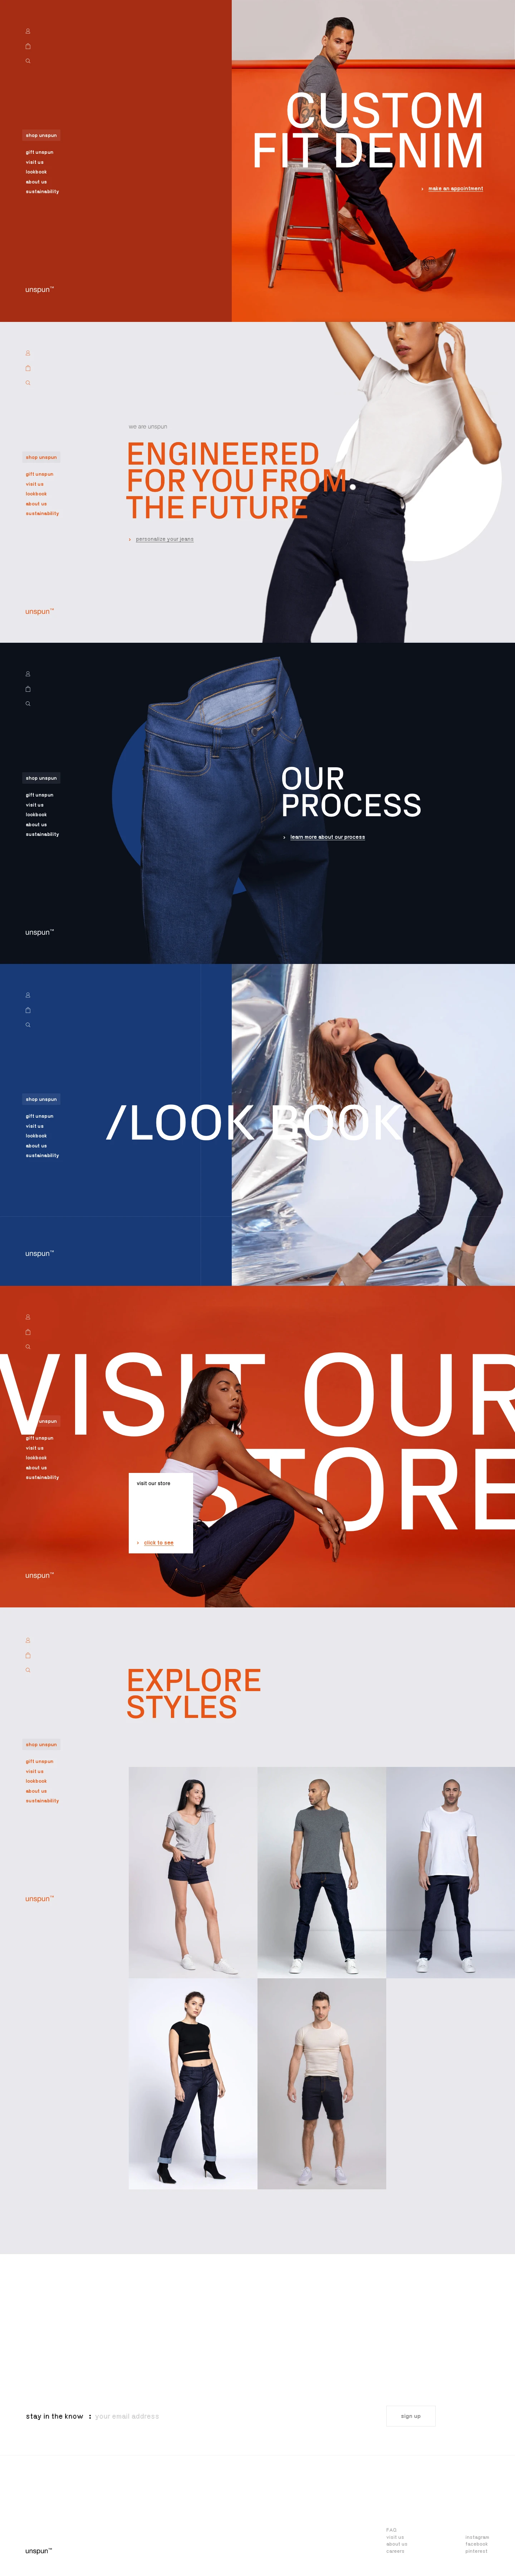 unspun Landing Page Example: unspun jeans are made on-demand, without sizes or standardization. We got rid of inventory and use only the most sustainable fabrics and methods to produce perfect fitting jeans stylized by you for you only.